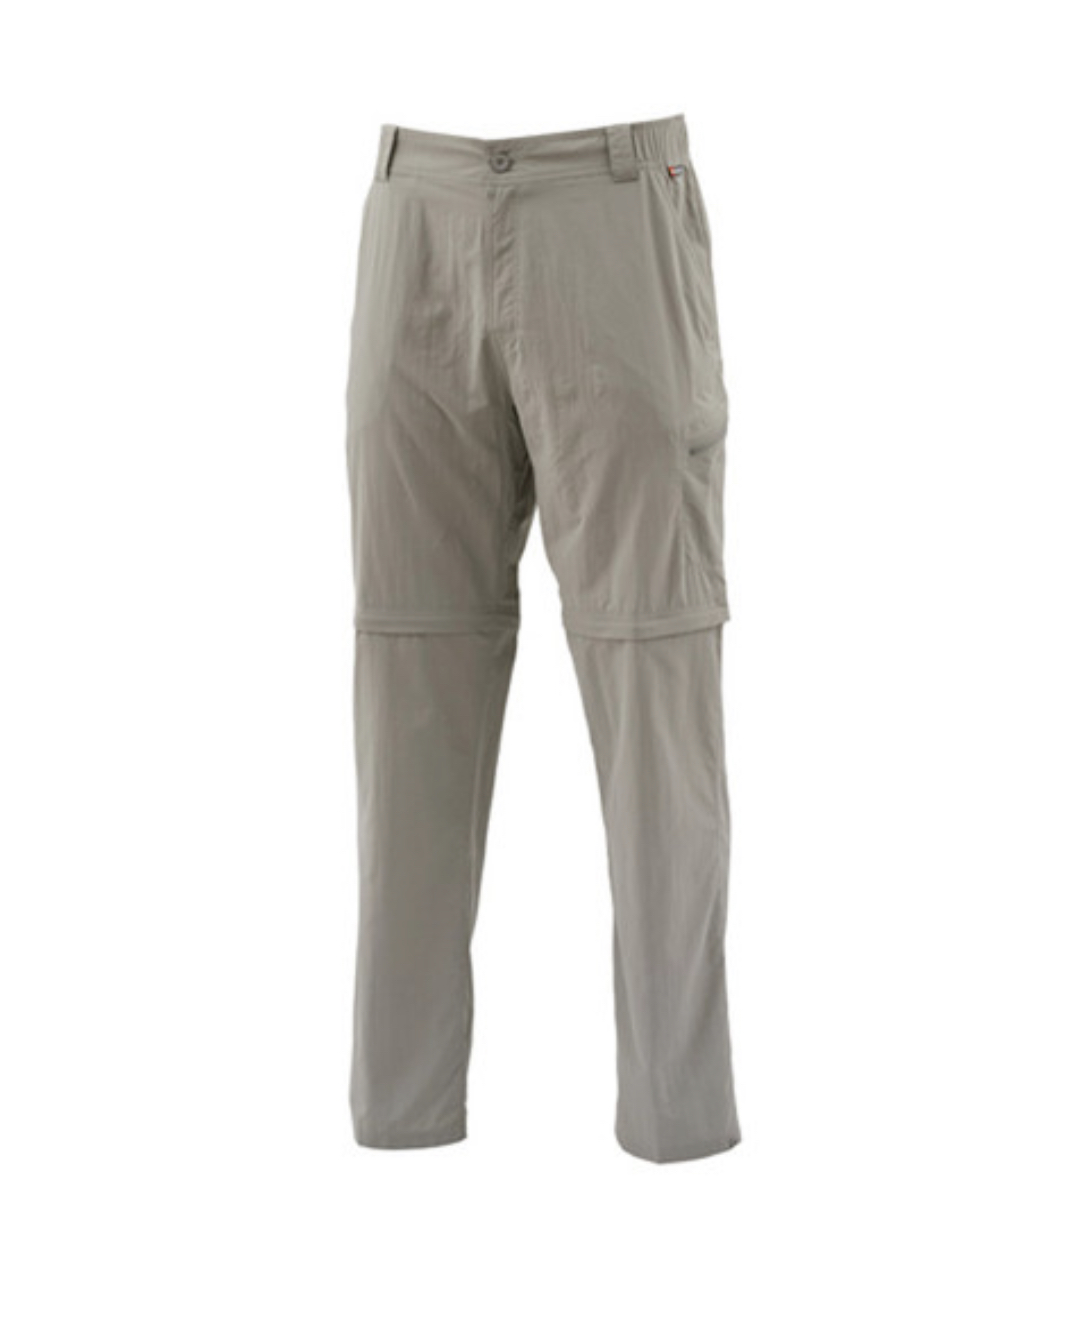 Simms M's Superlight Zip-Off Pants - Mineral - Large (36